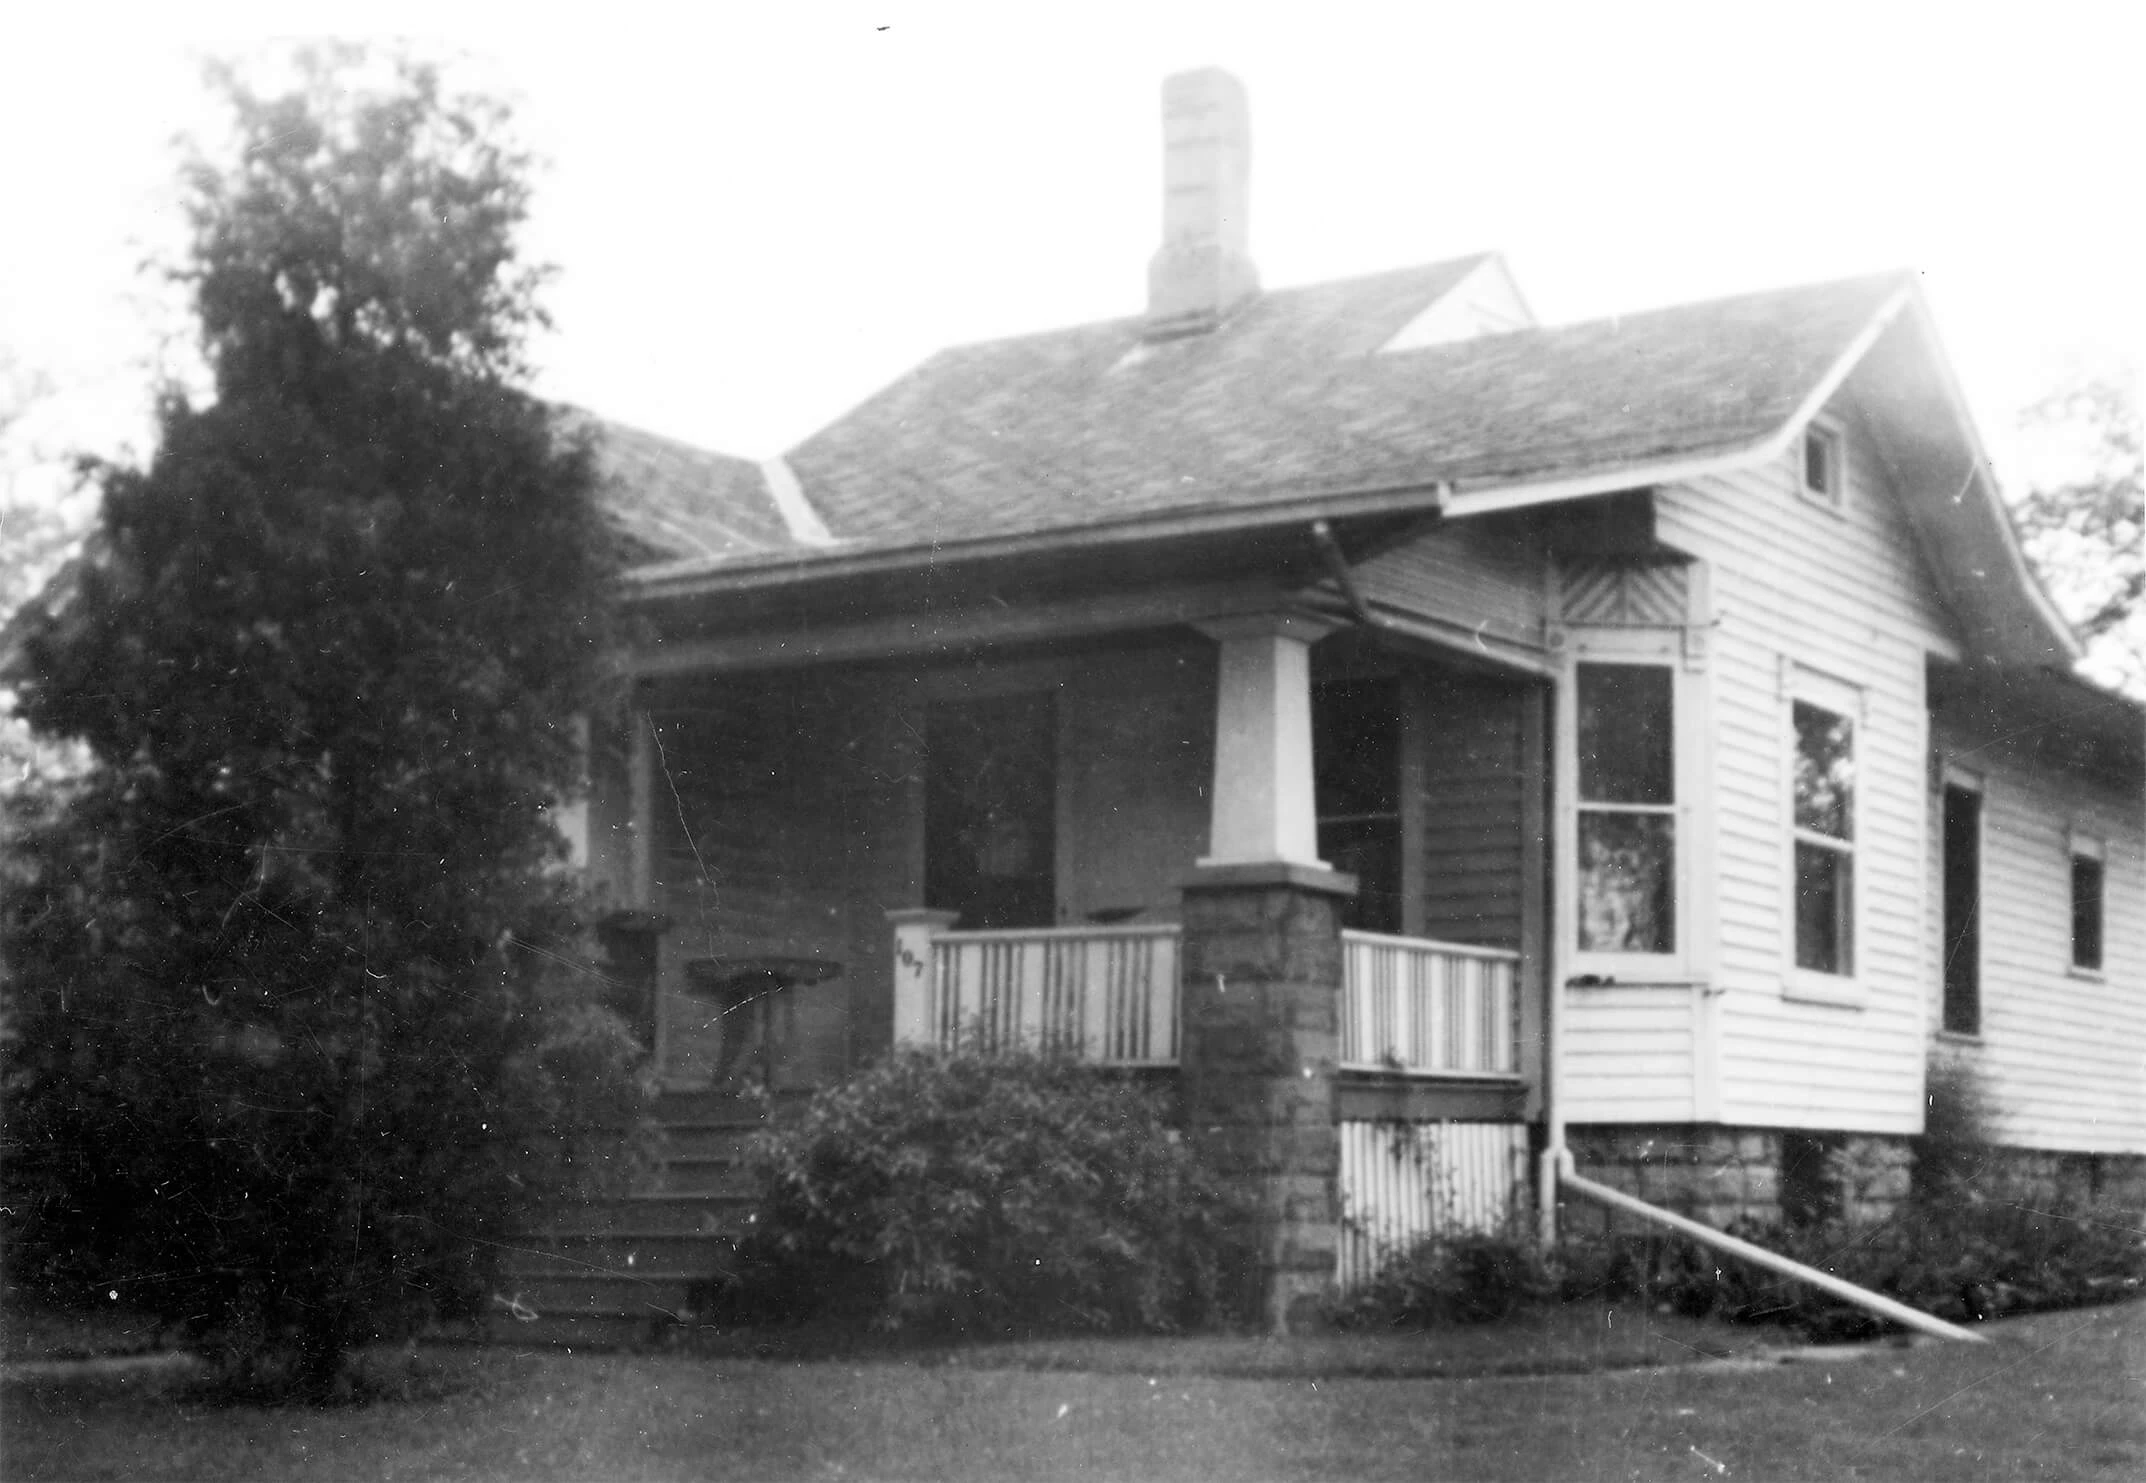 Black and white image of a single-story light colored frame house with small front porch and chimney.